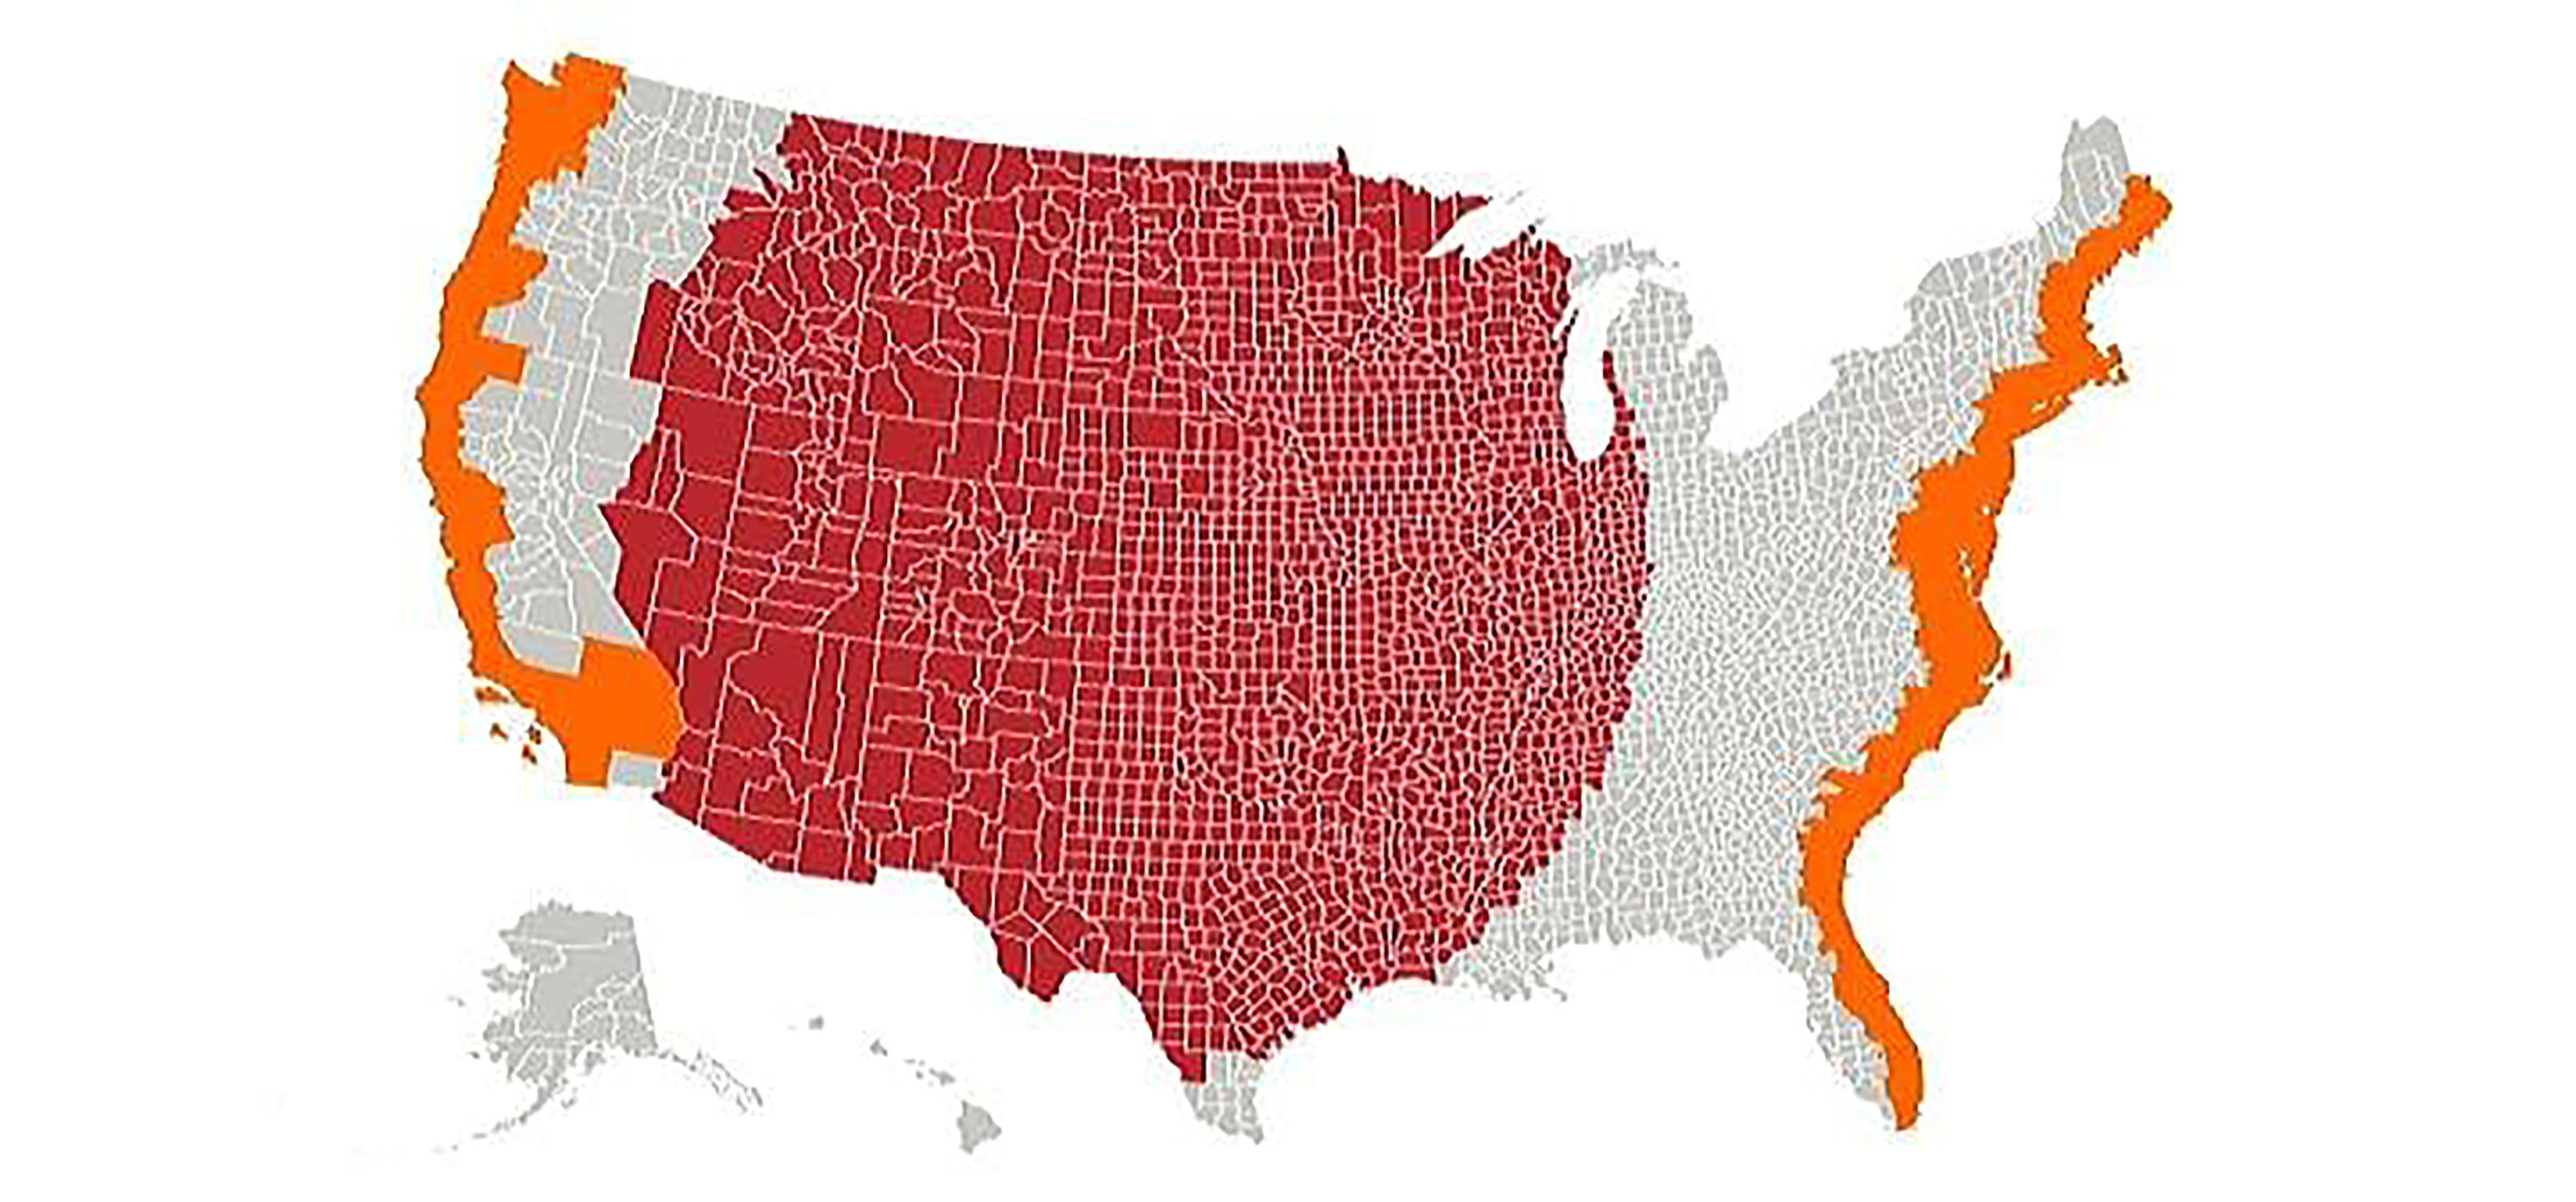 The orange sections represent a population equal to the entire red section